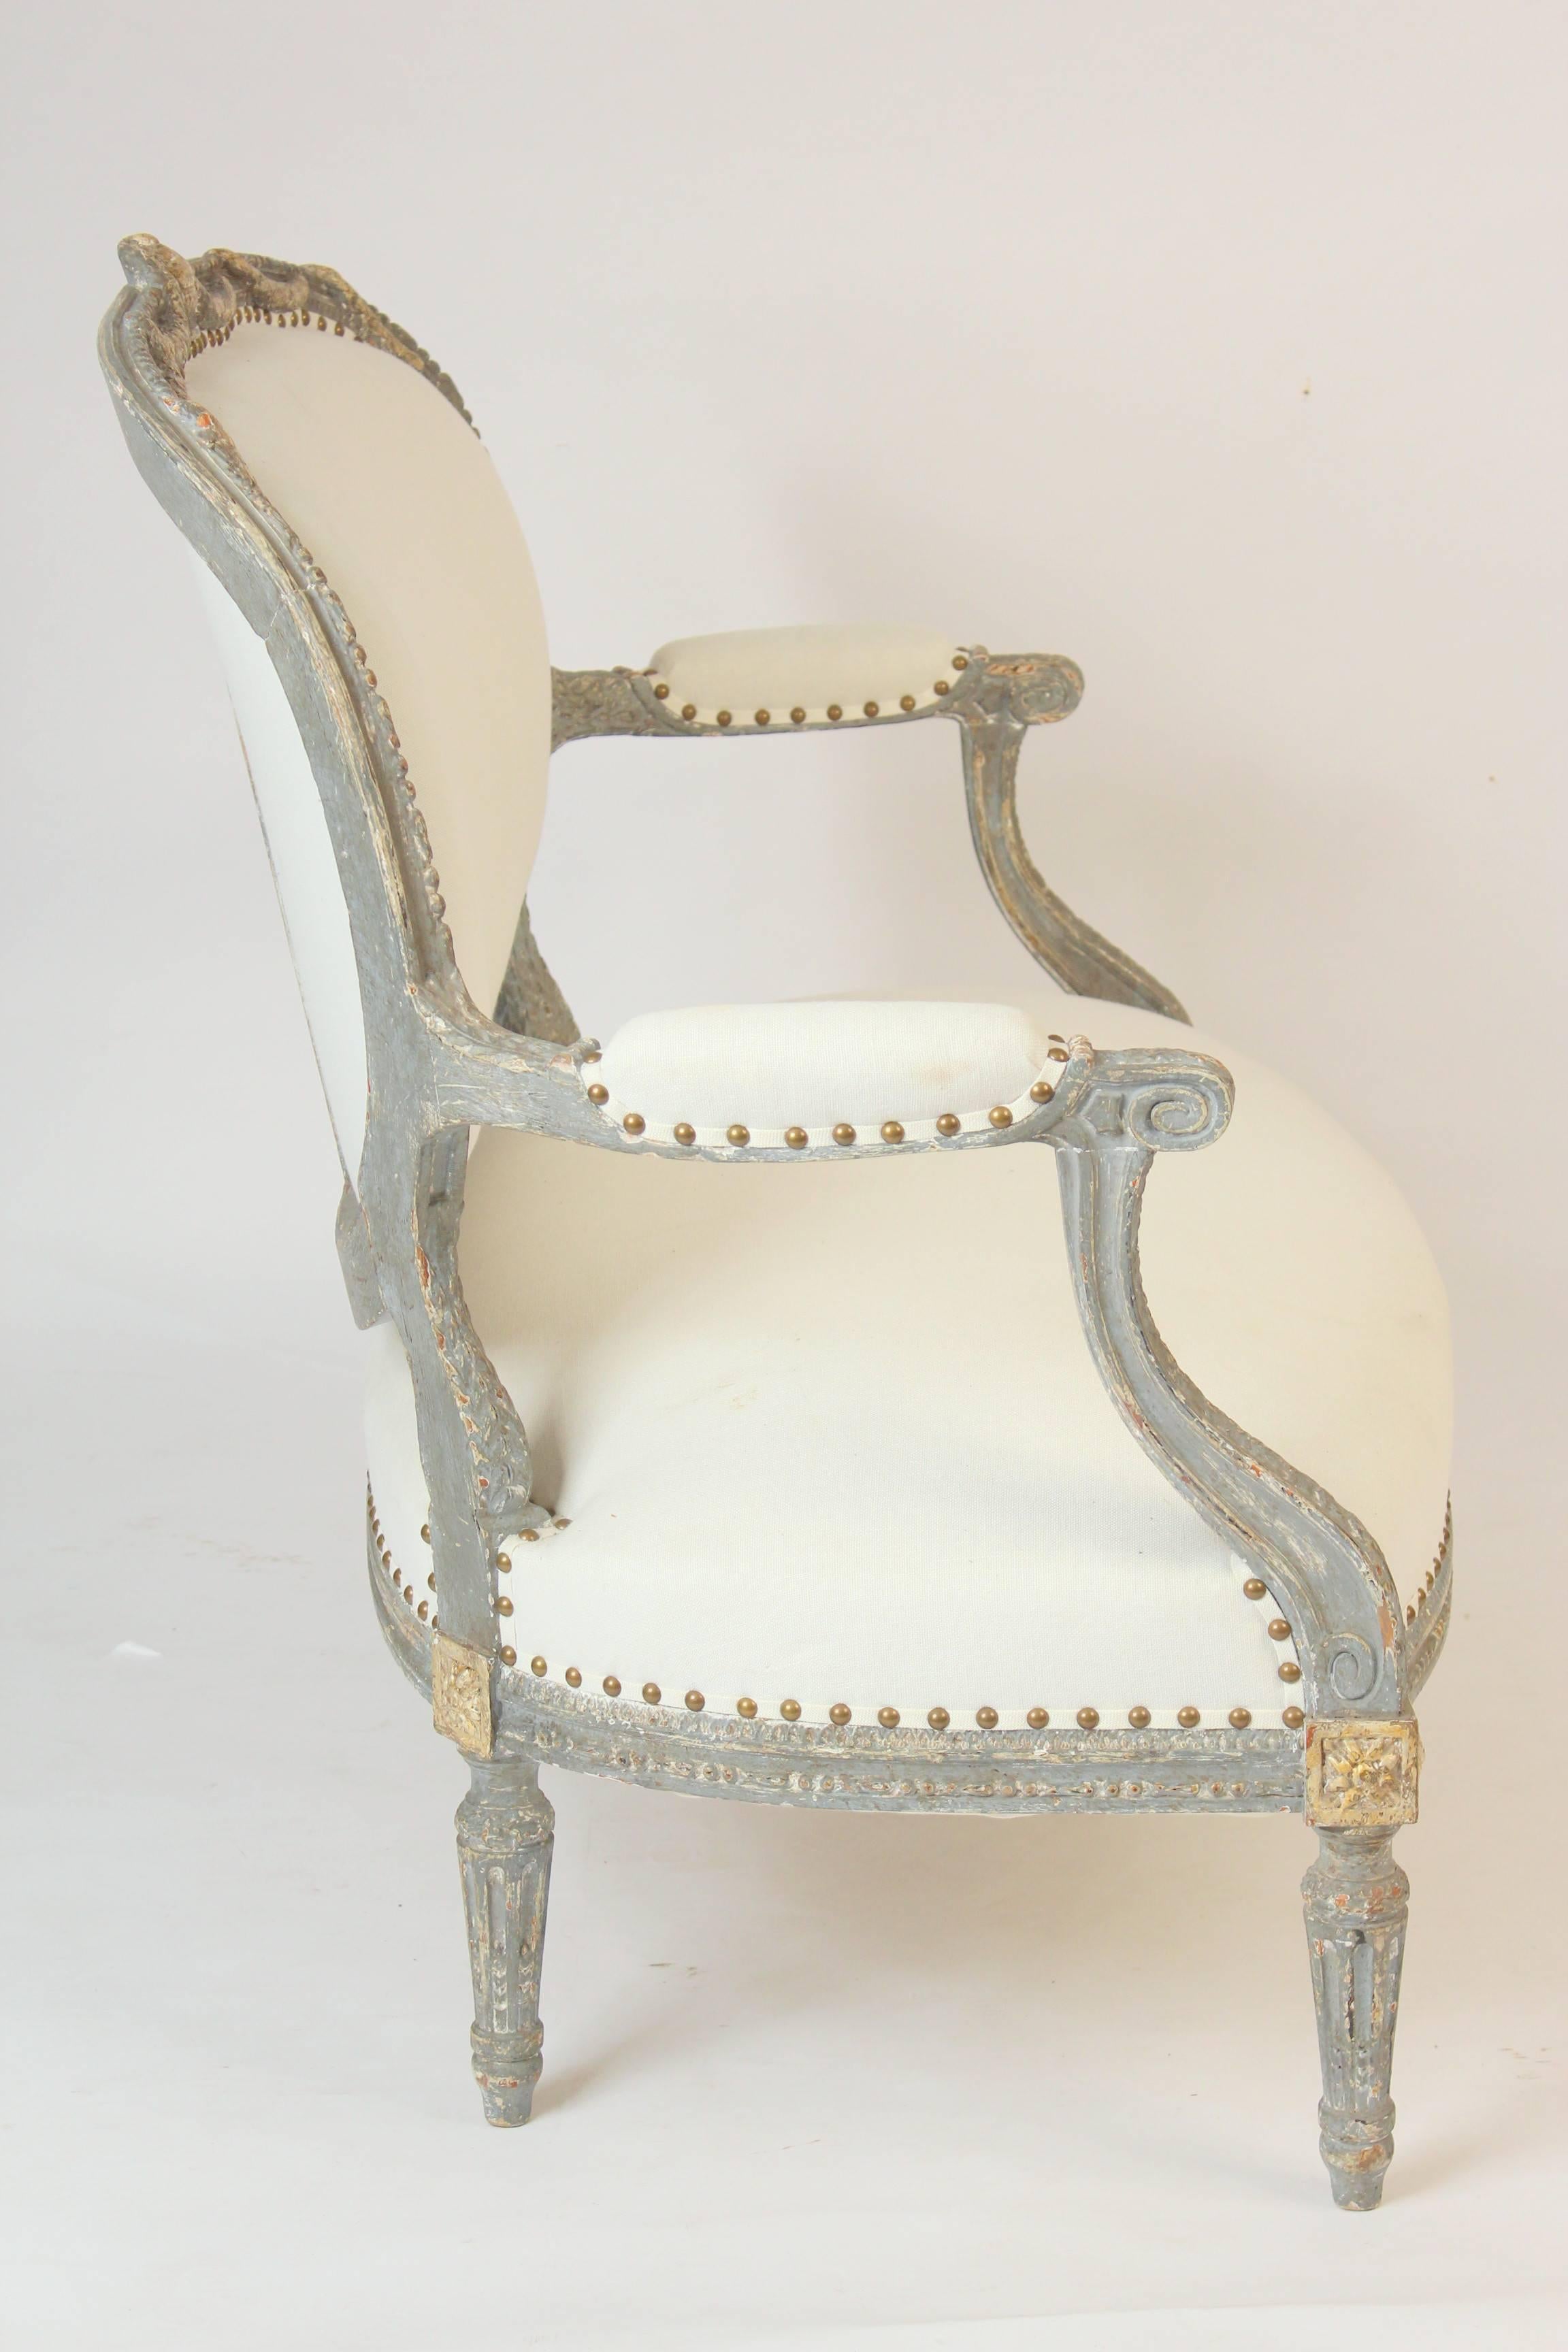 Louis XVI style grisaille painted and partial gilt settee with a swagged carved crest rail, late 19th century. Nice crusty old original paint.